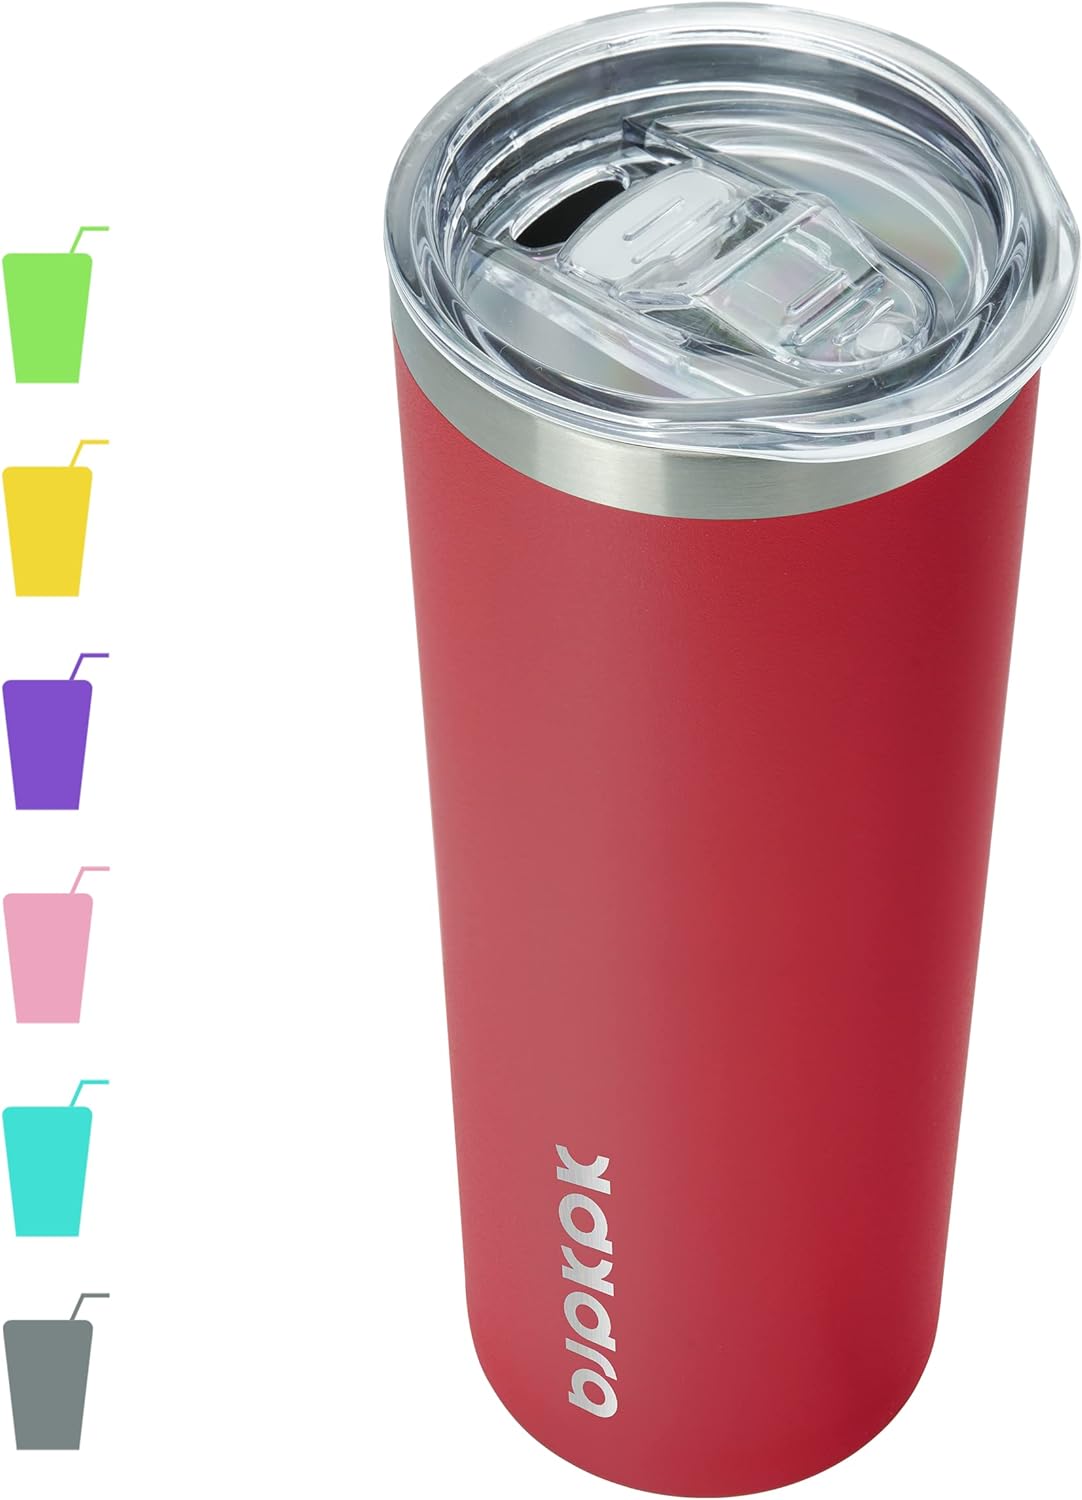 BJPKPK Skinny Tumbler with Lid 20 oz Stainless Steel Slim Vacuum Insulated Tumblers Cup,Gray